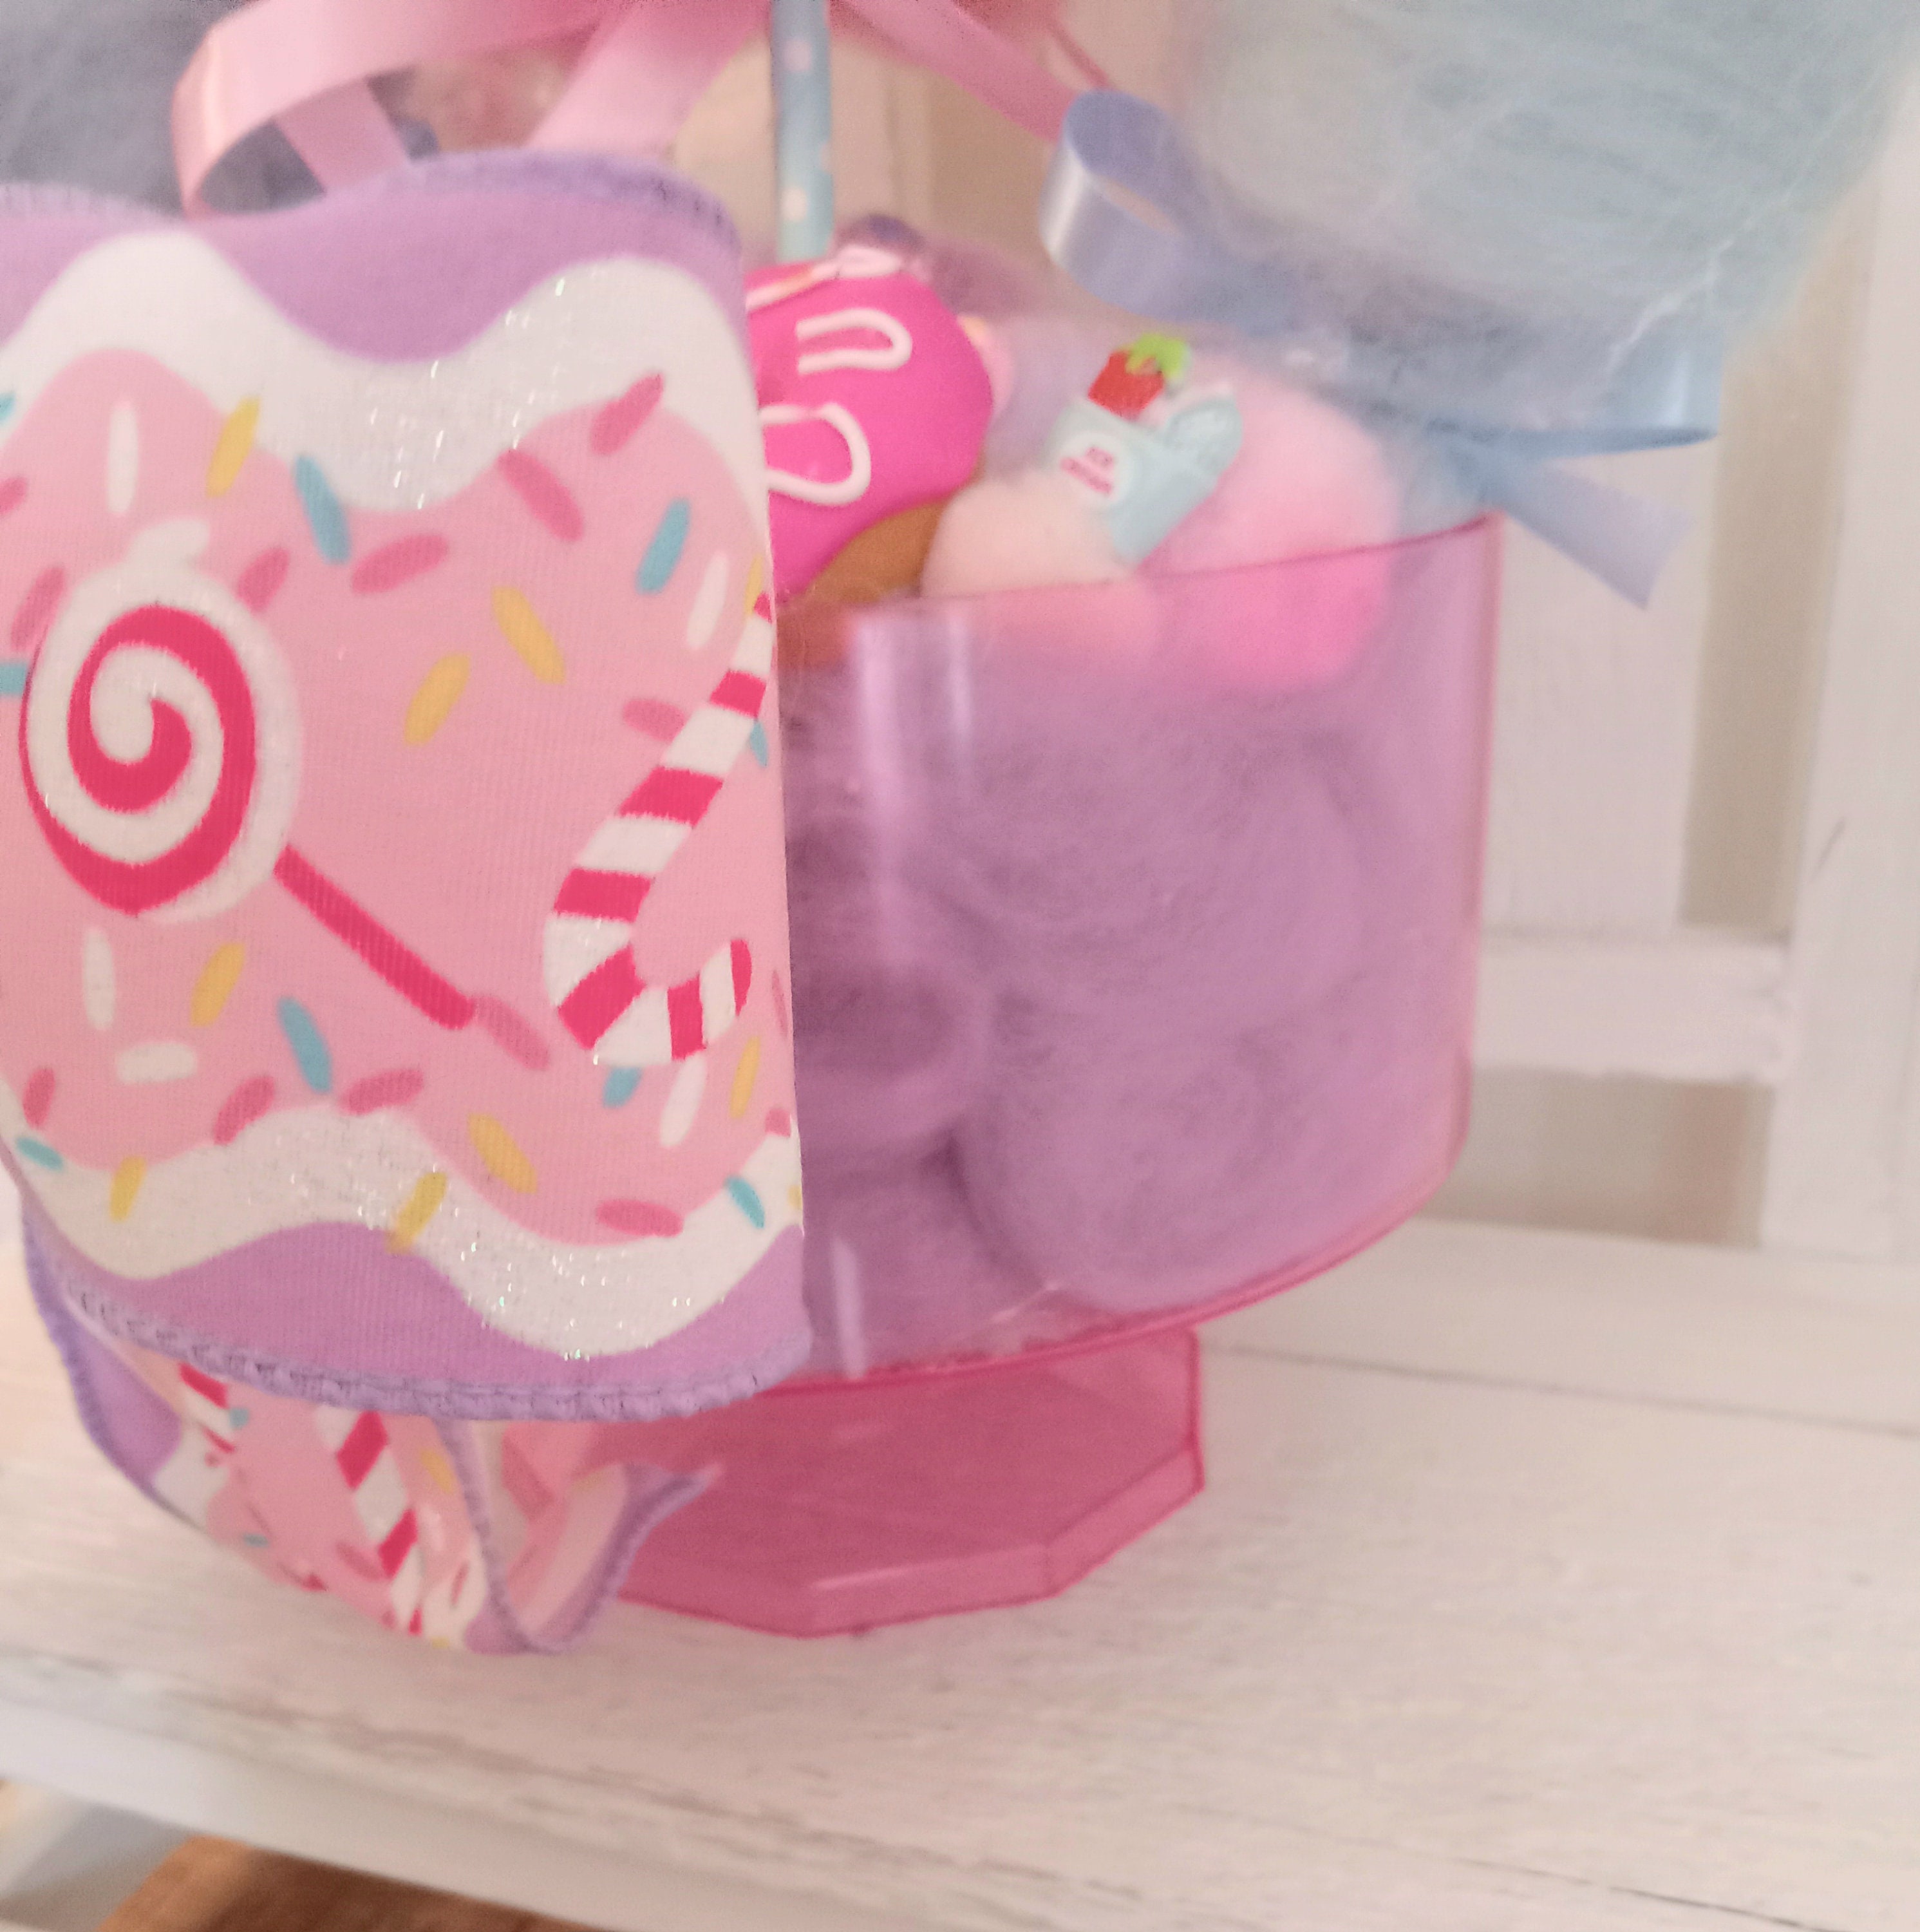 Fake Cotton Candy Centerpiece Candyland Party Decorations - Etsy